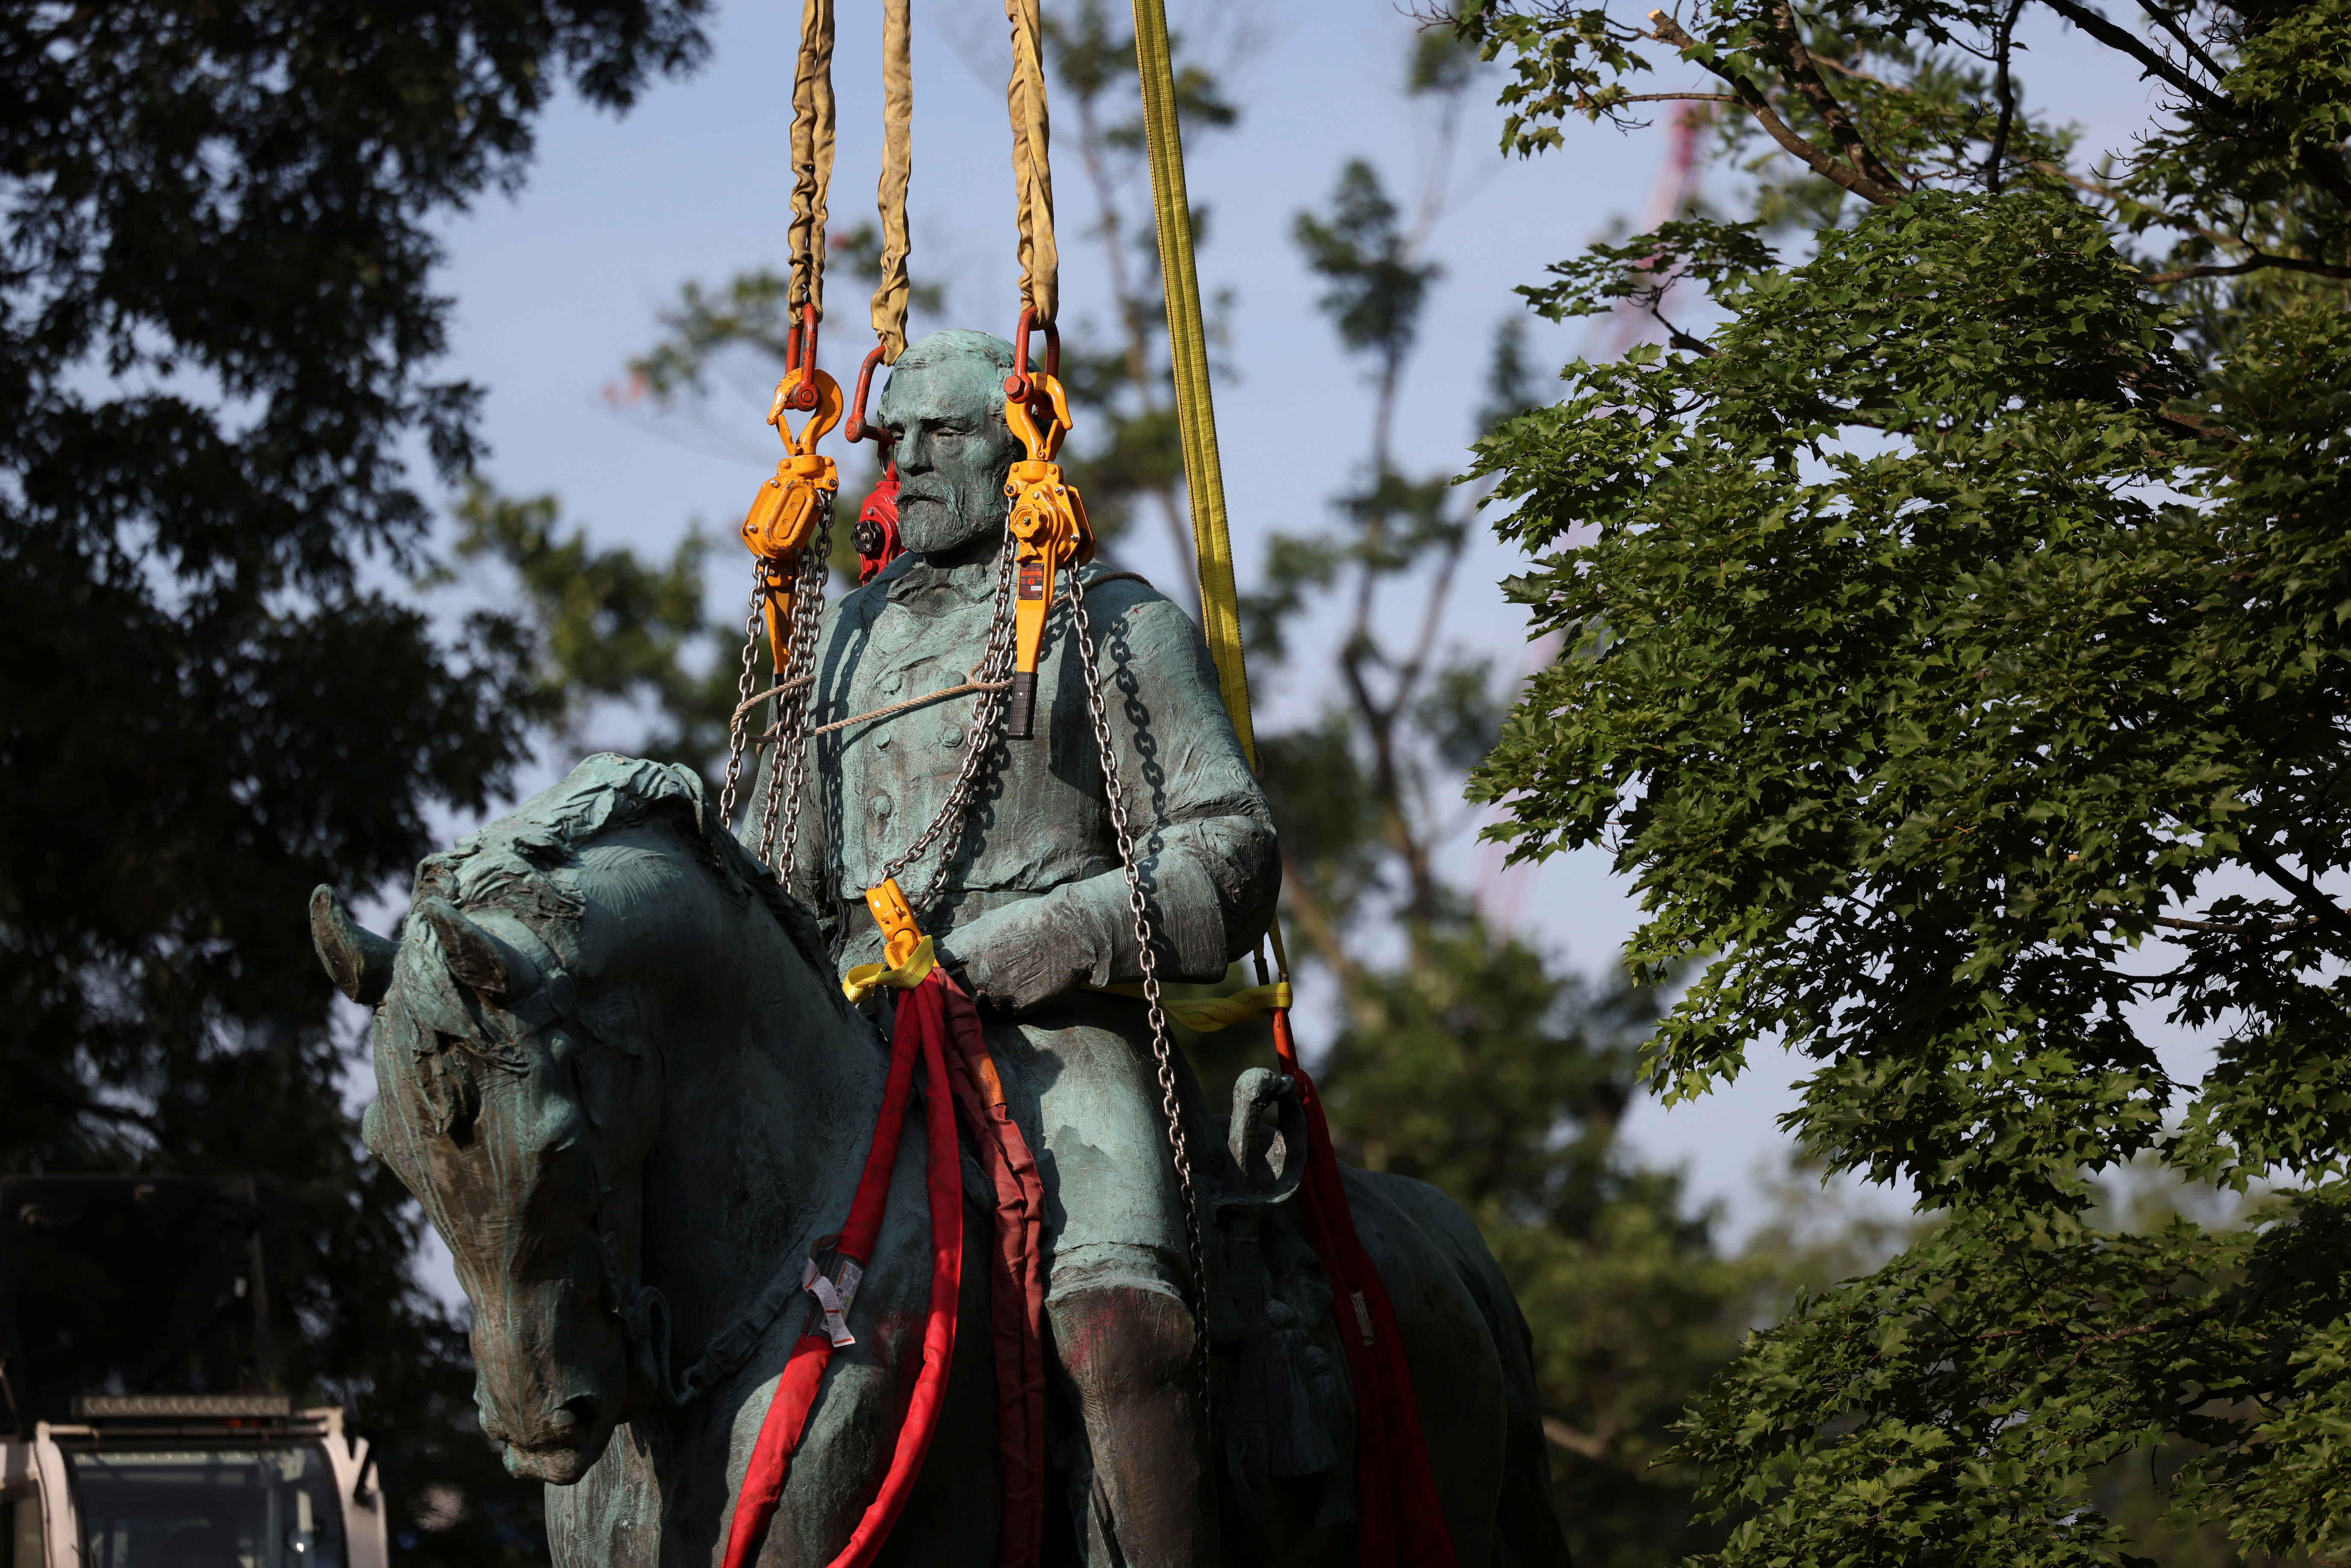 Workers remove a statue of Confederate General Robert E. Lee, in Charlottesville